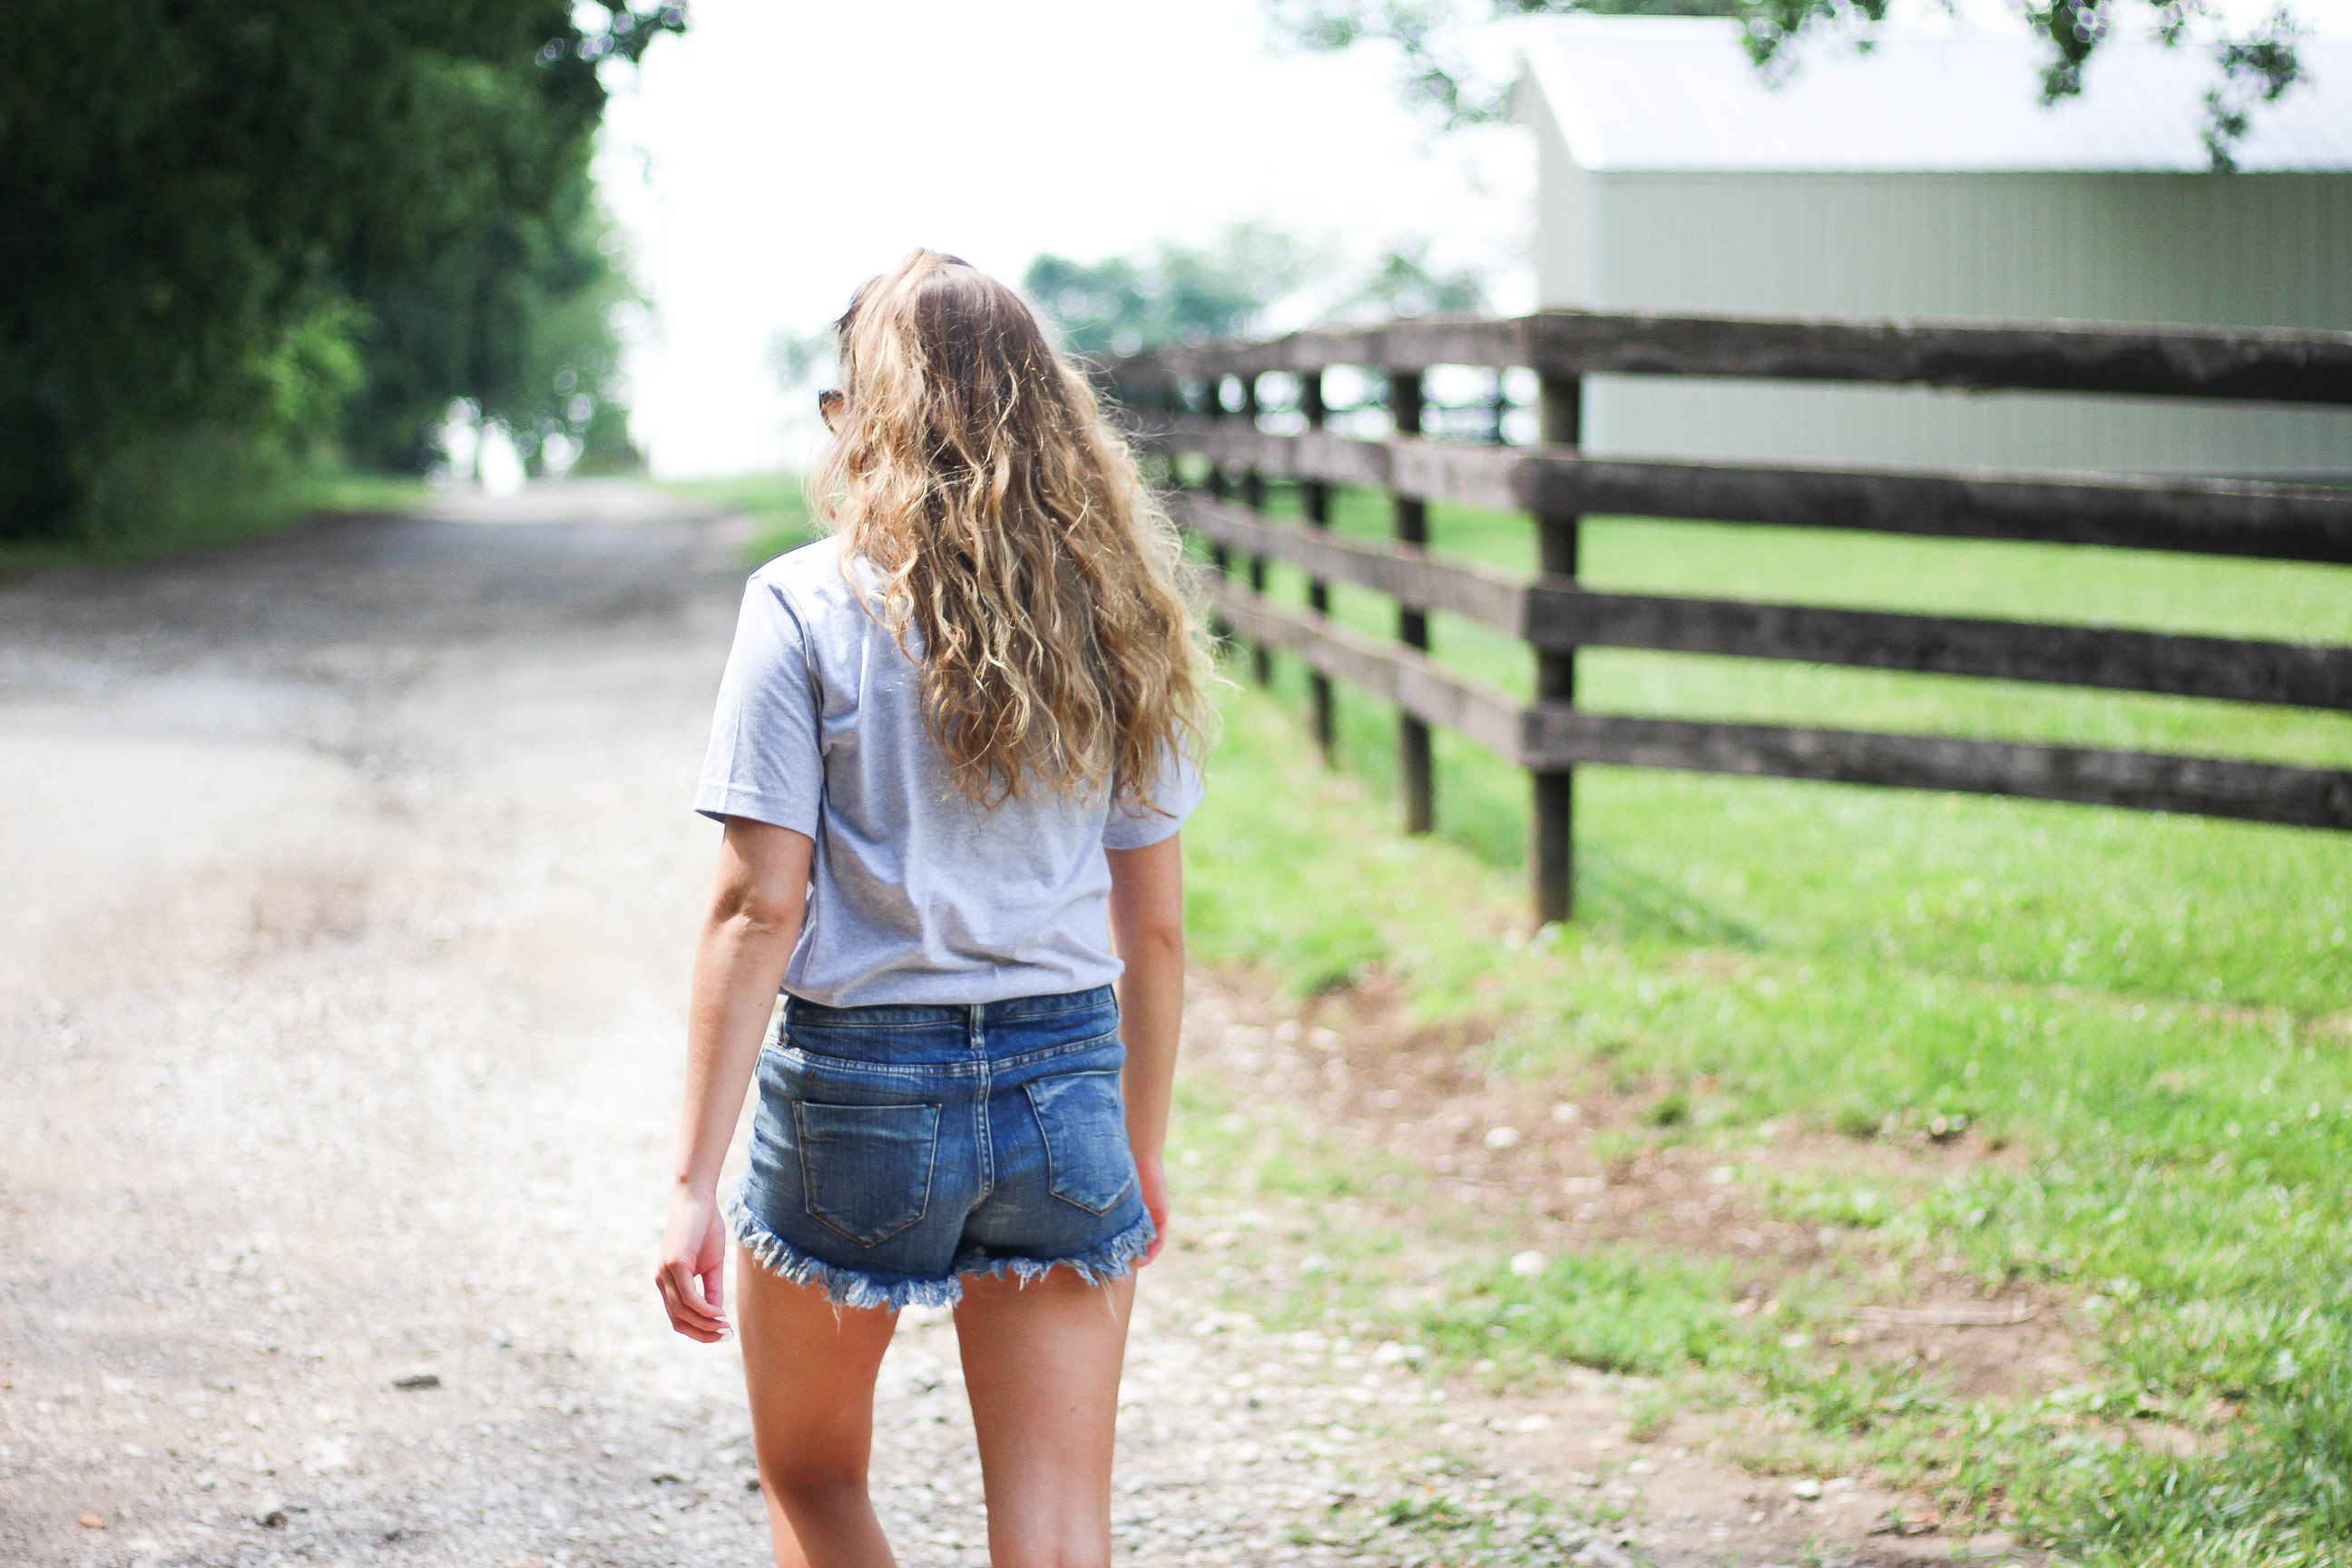 HANGRY t-shirt, jean shorts, OOTD, casual outfit, by Lauren Lindmark on Daily Dose of Charm